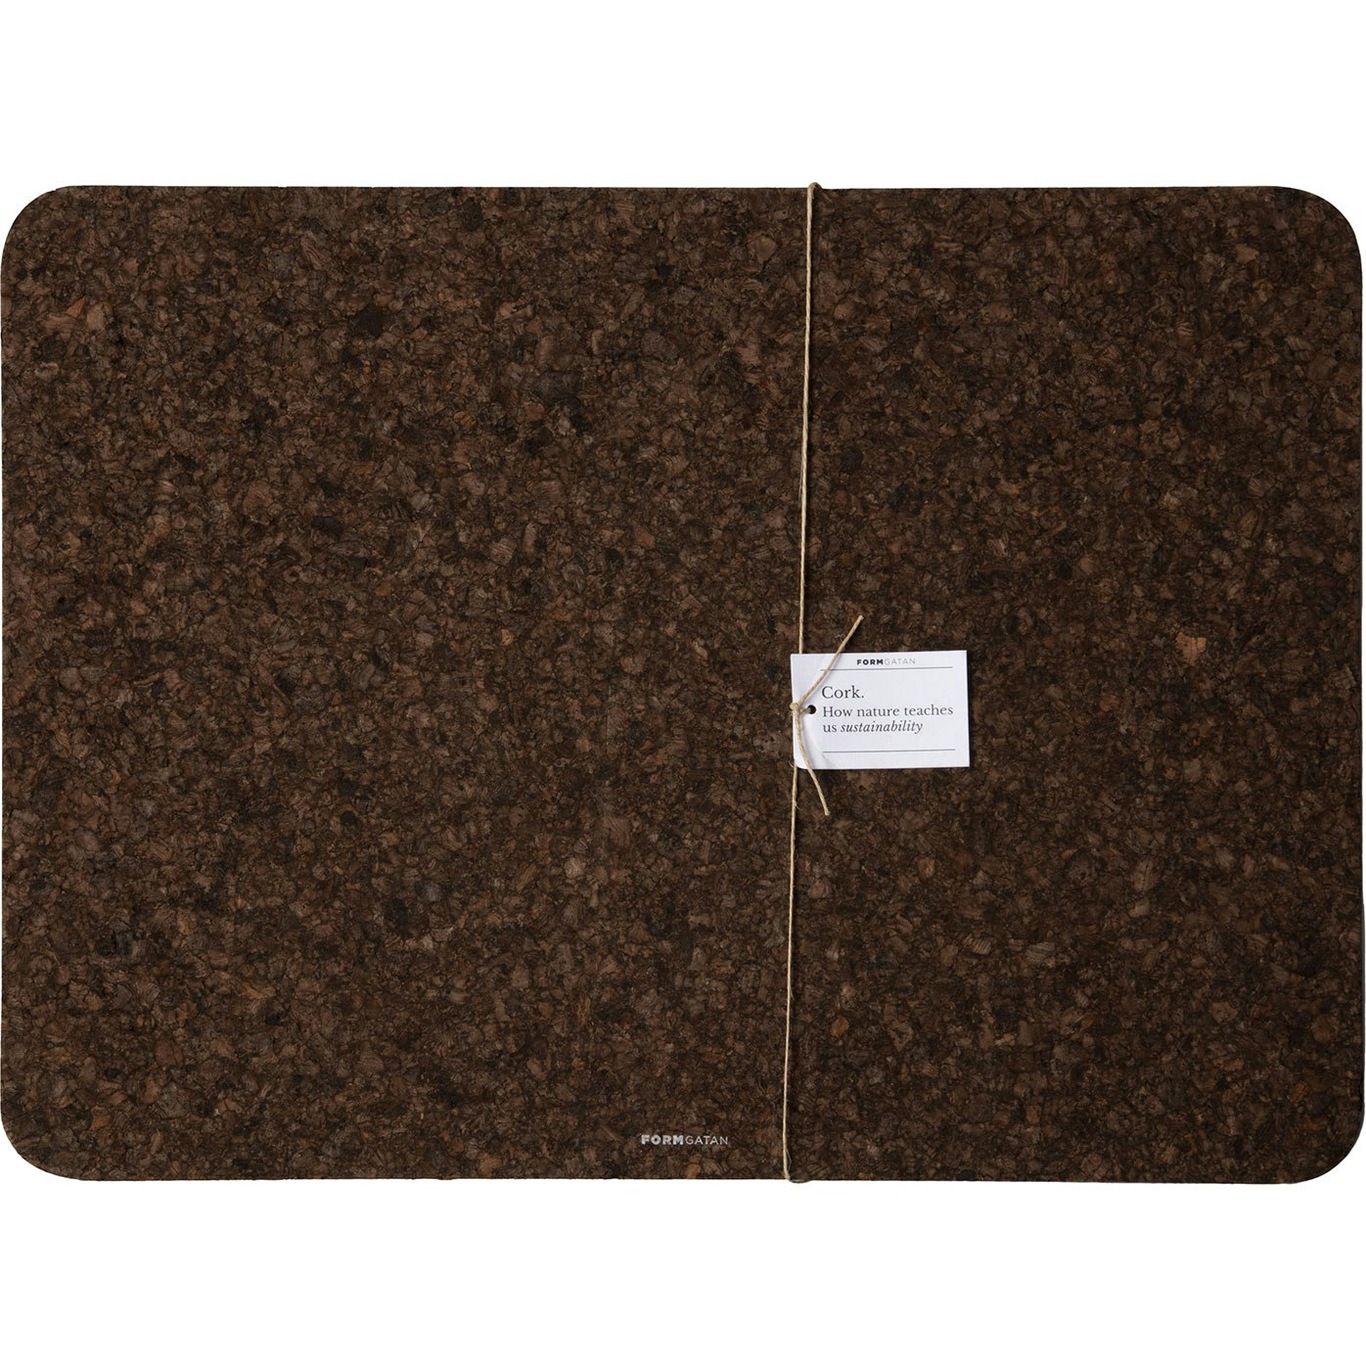 Cork Placemat 2-pack, Smoked